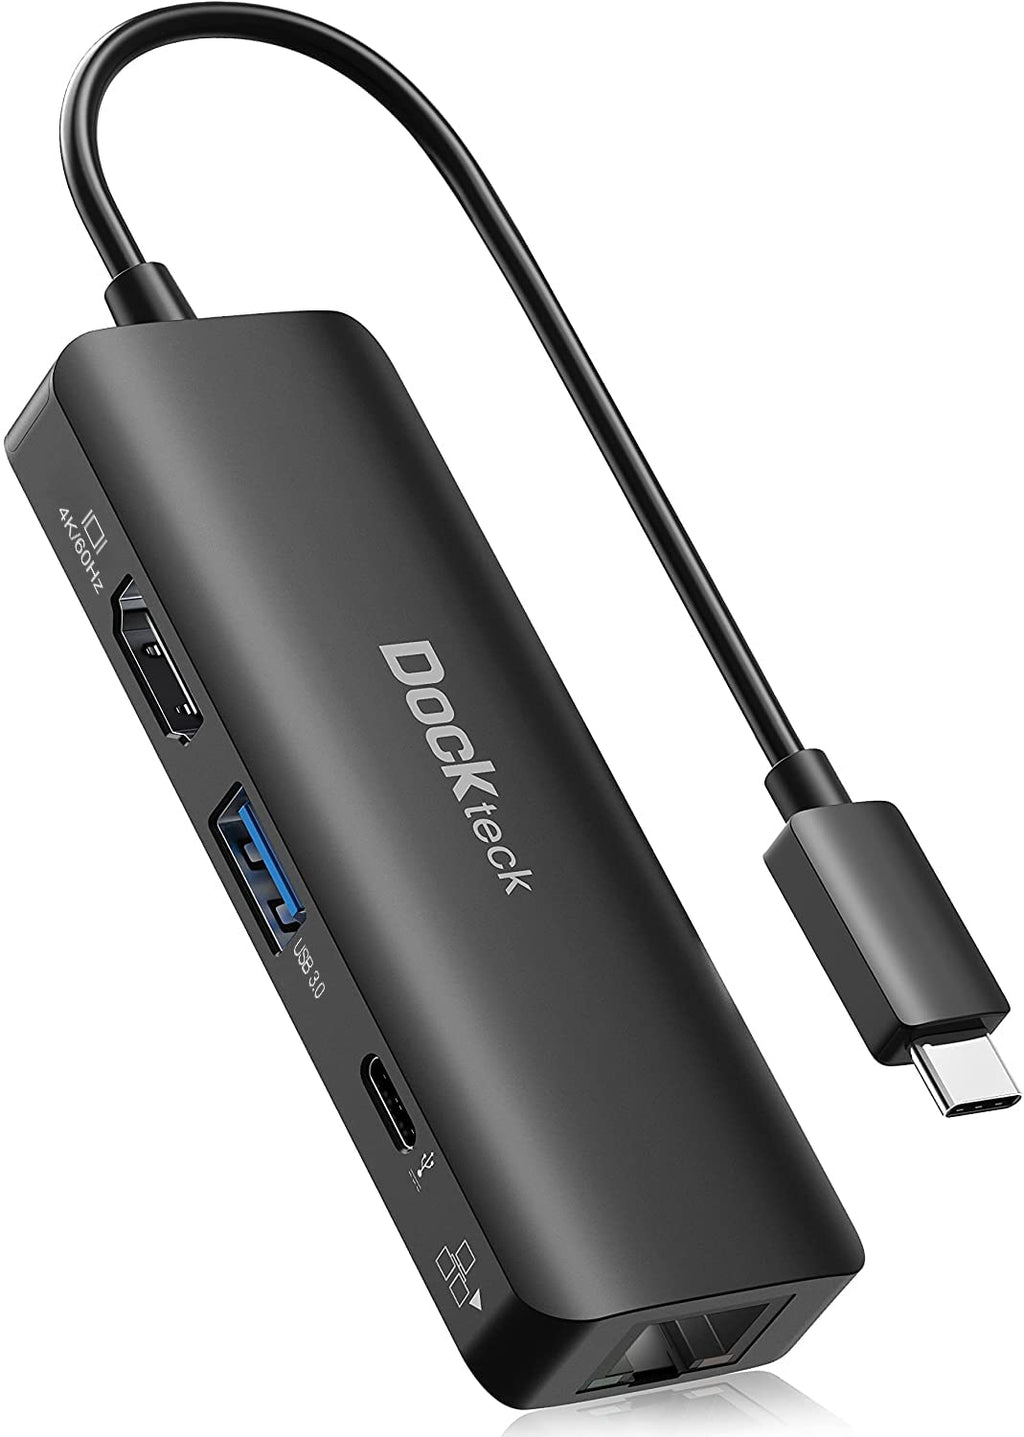  [AUSTRALIA] - USB C Hub 4K 60Hz, Dockteck 4-in-1 USB C PD Ethernet Hub Dongle with 4K 60Hz HDMI, 1Gbps Ethernet, 100W PD, USB 3.0 for MacBook Pro / Air M1 2020, iPad Pro 2021, iPad Air 2020 and More